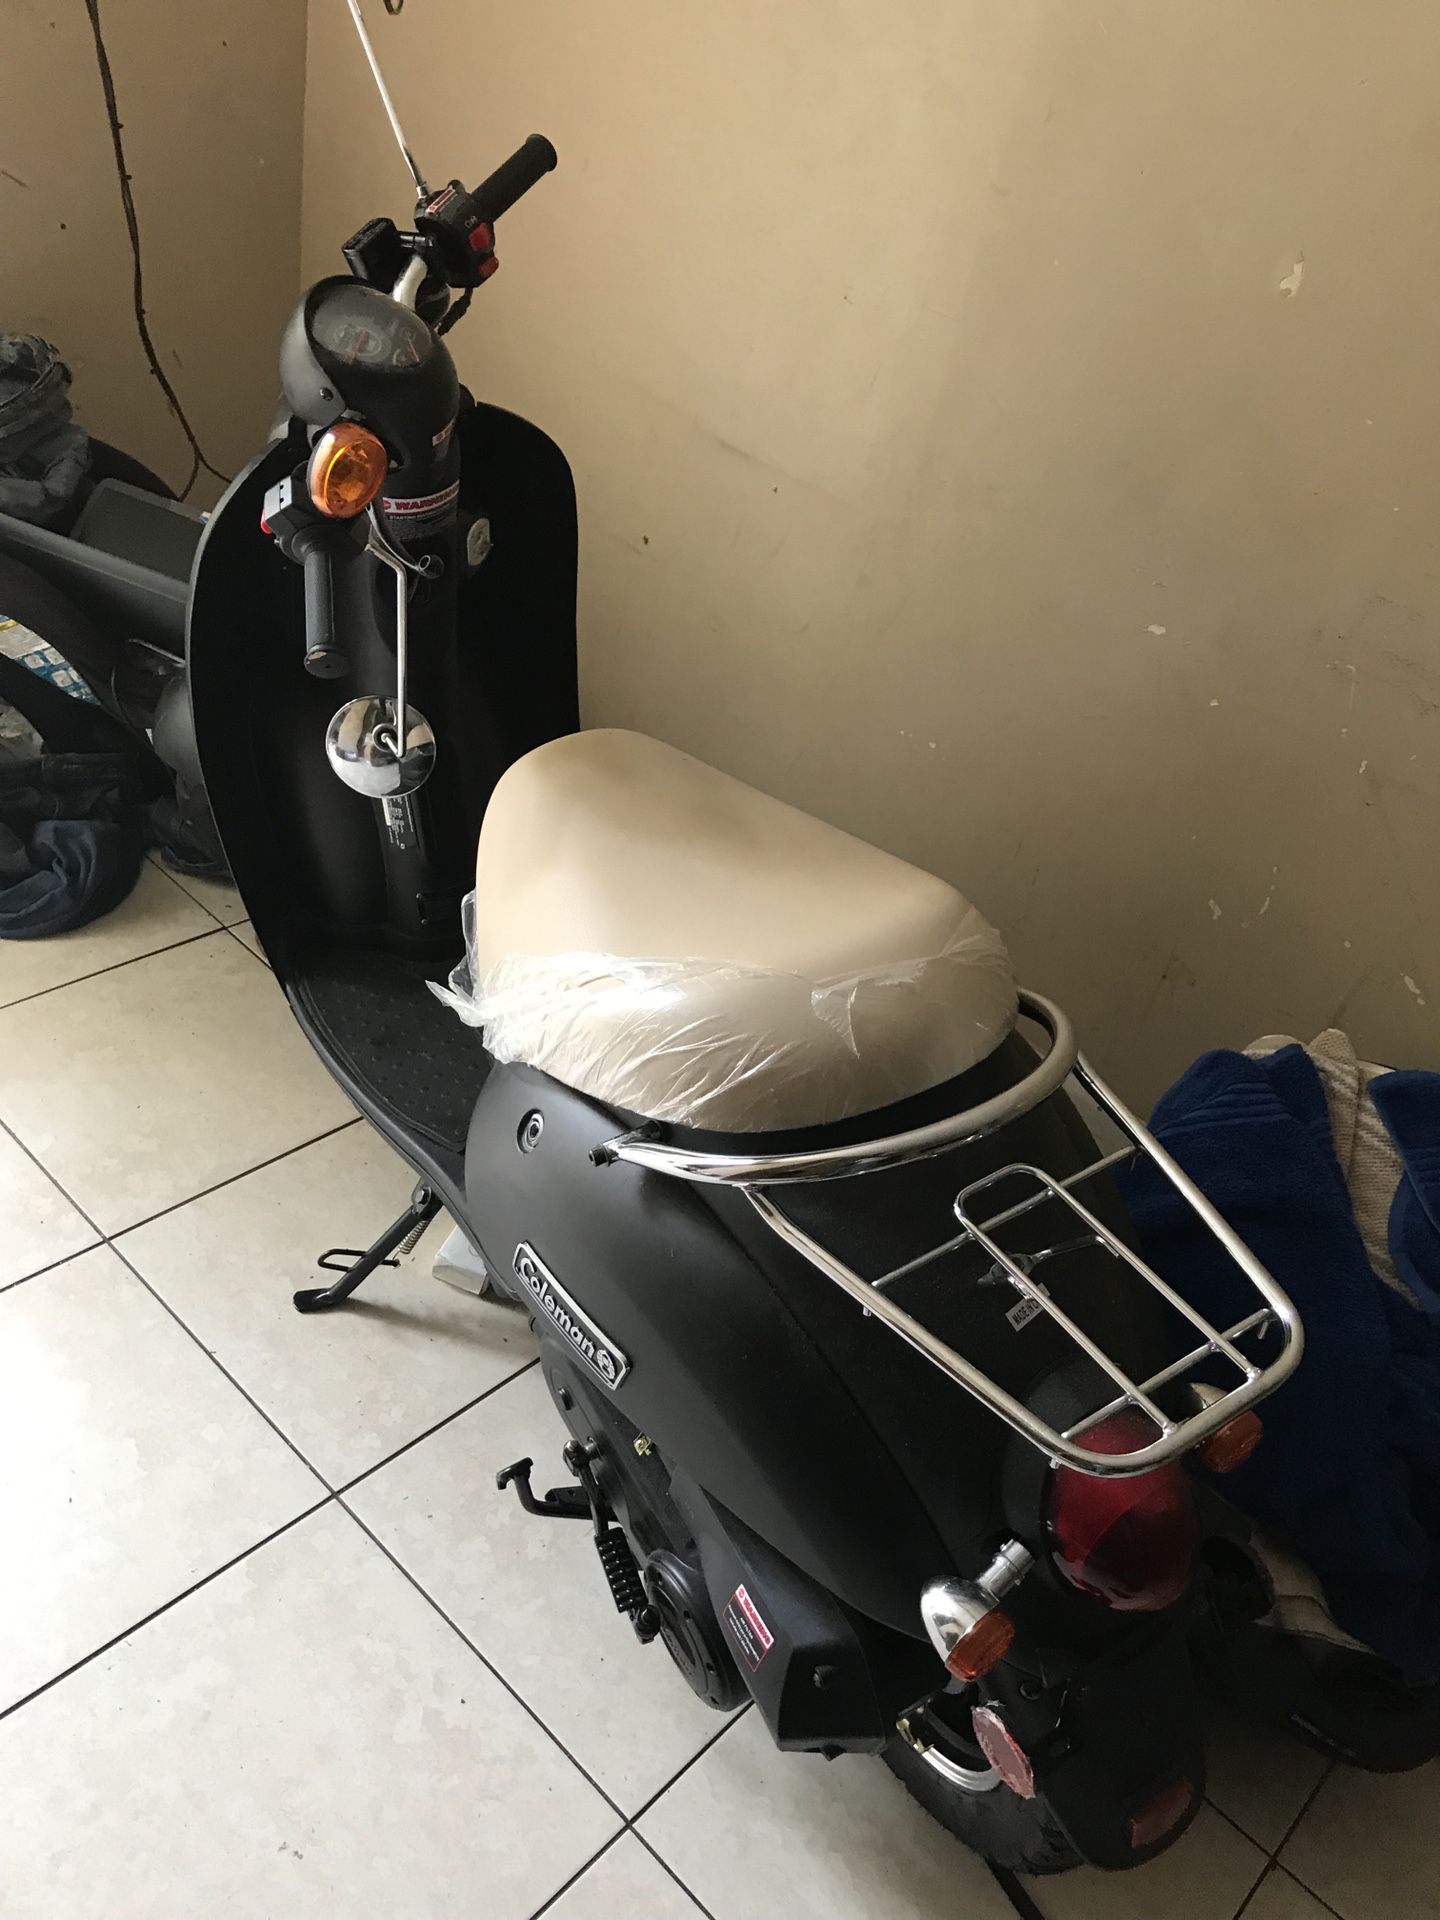 Moped Scooter